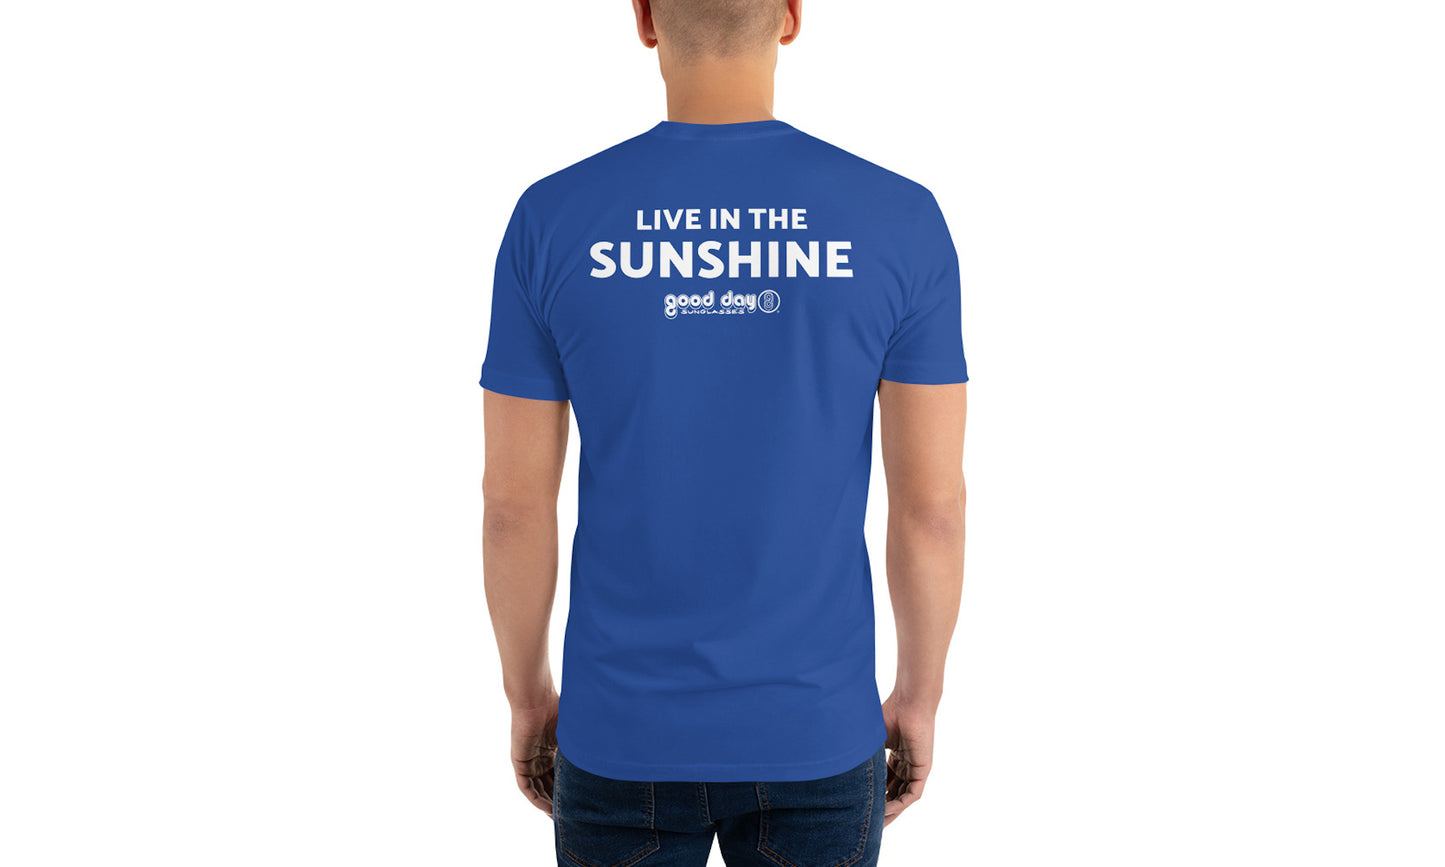 Good Day Sunglasses Live in the Sunshine Tee--back view